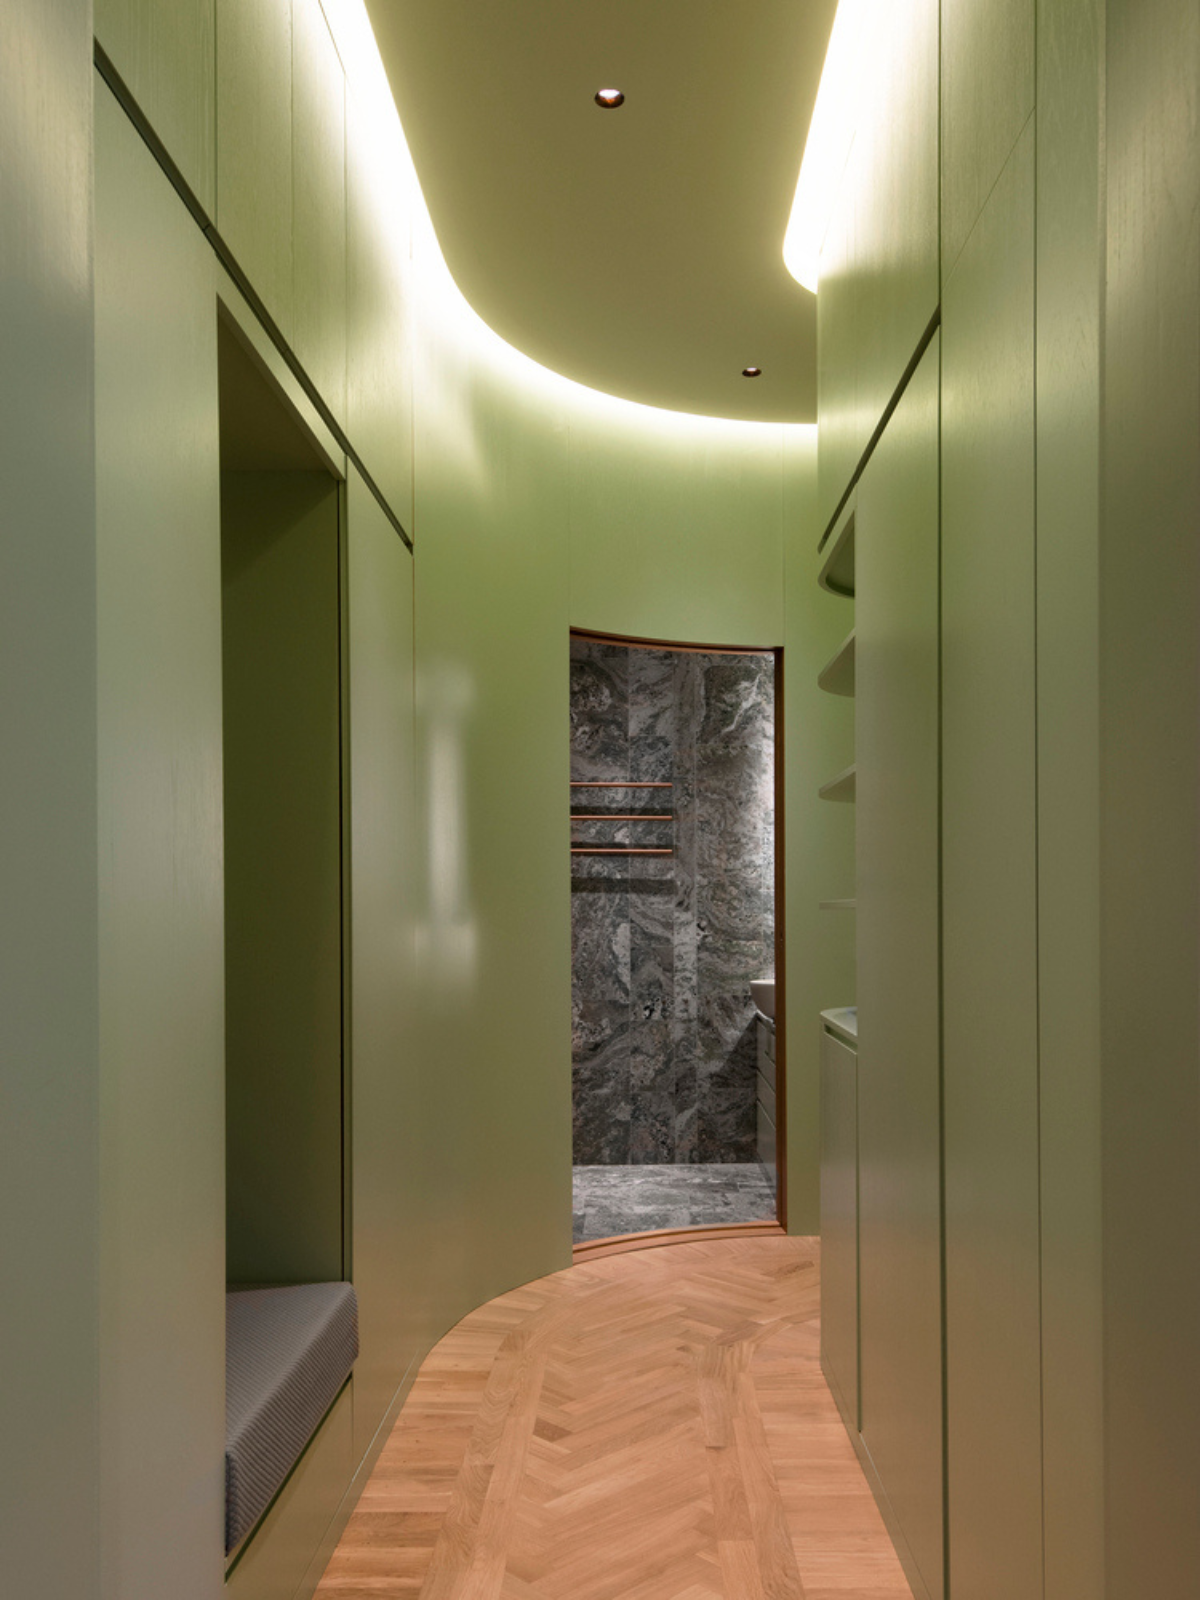 hallway with green walls and ceiling, coved lighting, niche bench, wooden floor